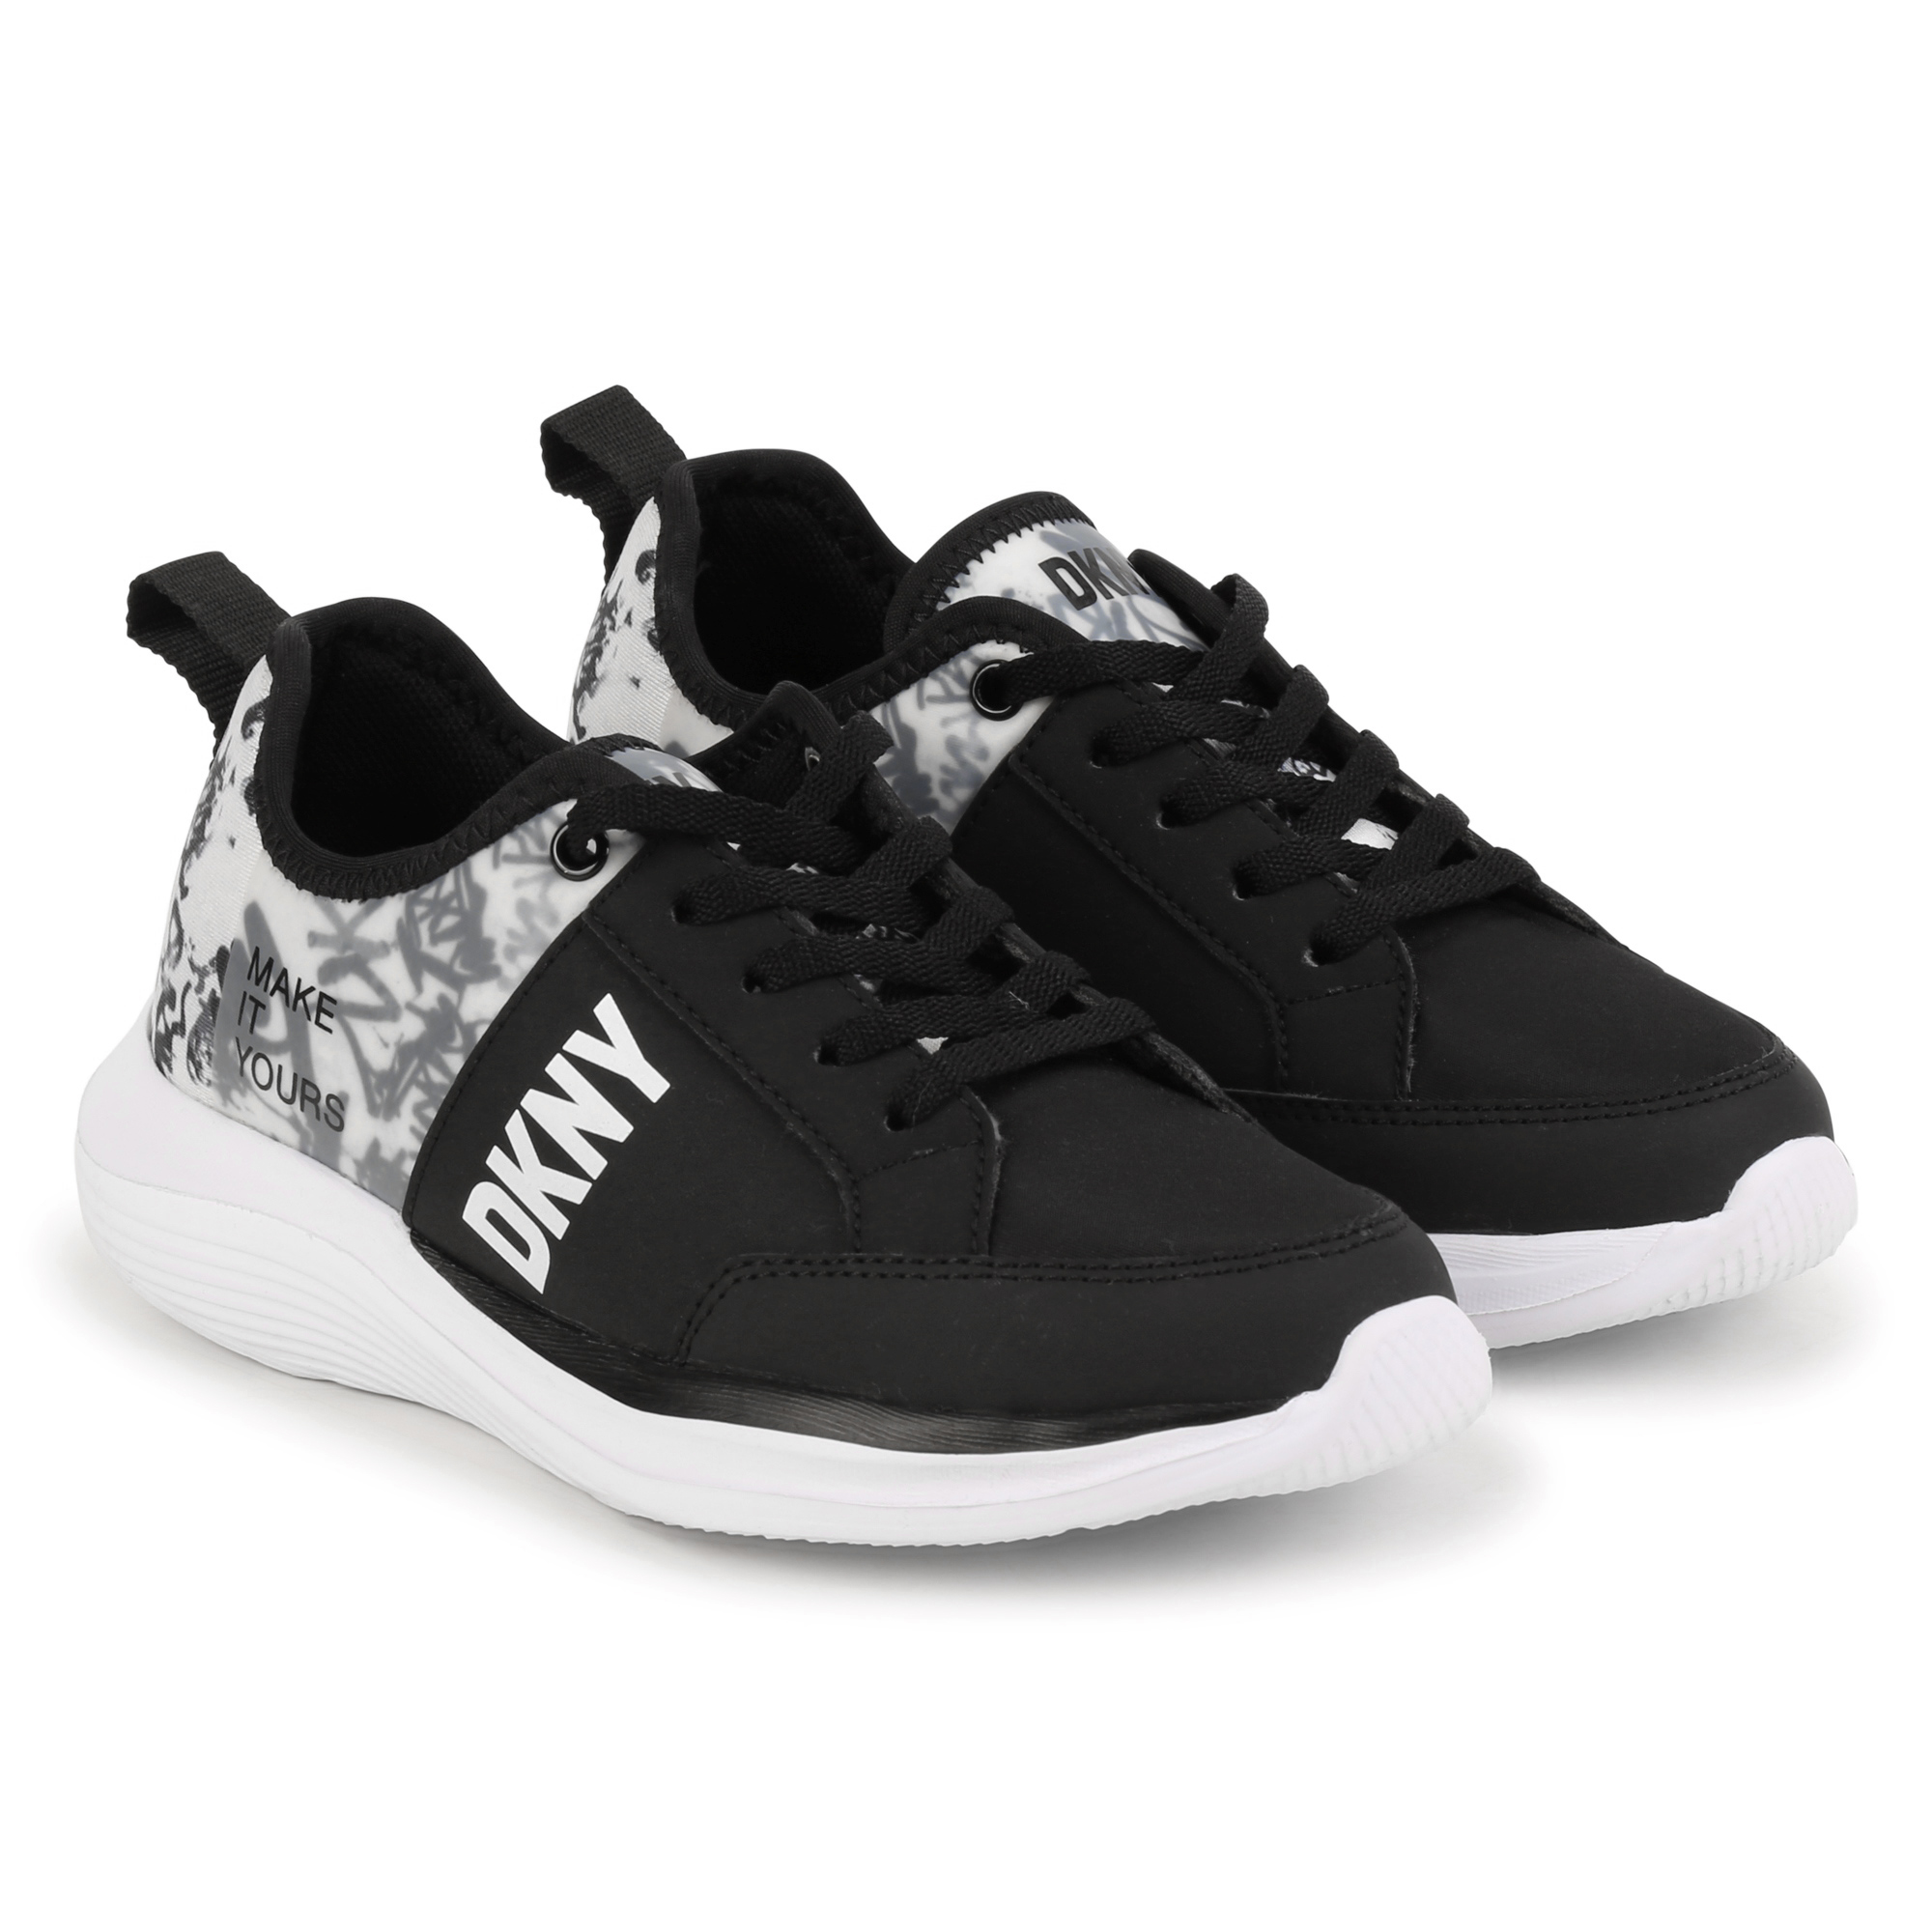 DKNY Lace-up trainers unisex black 